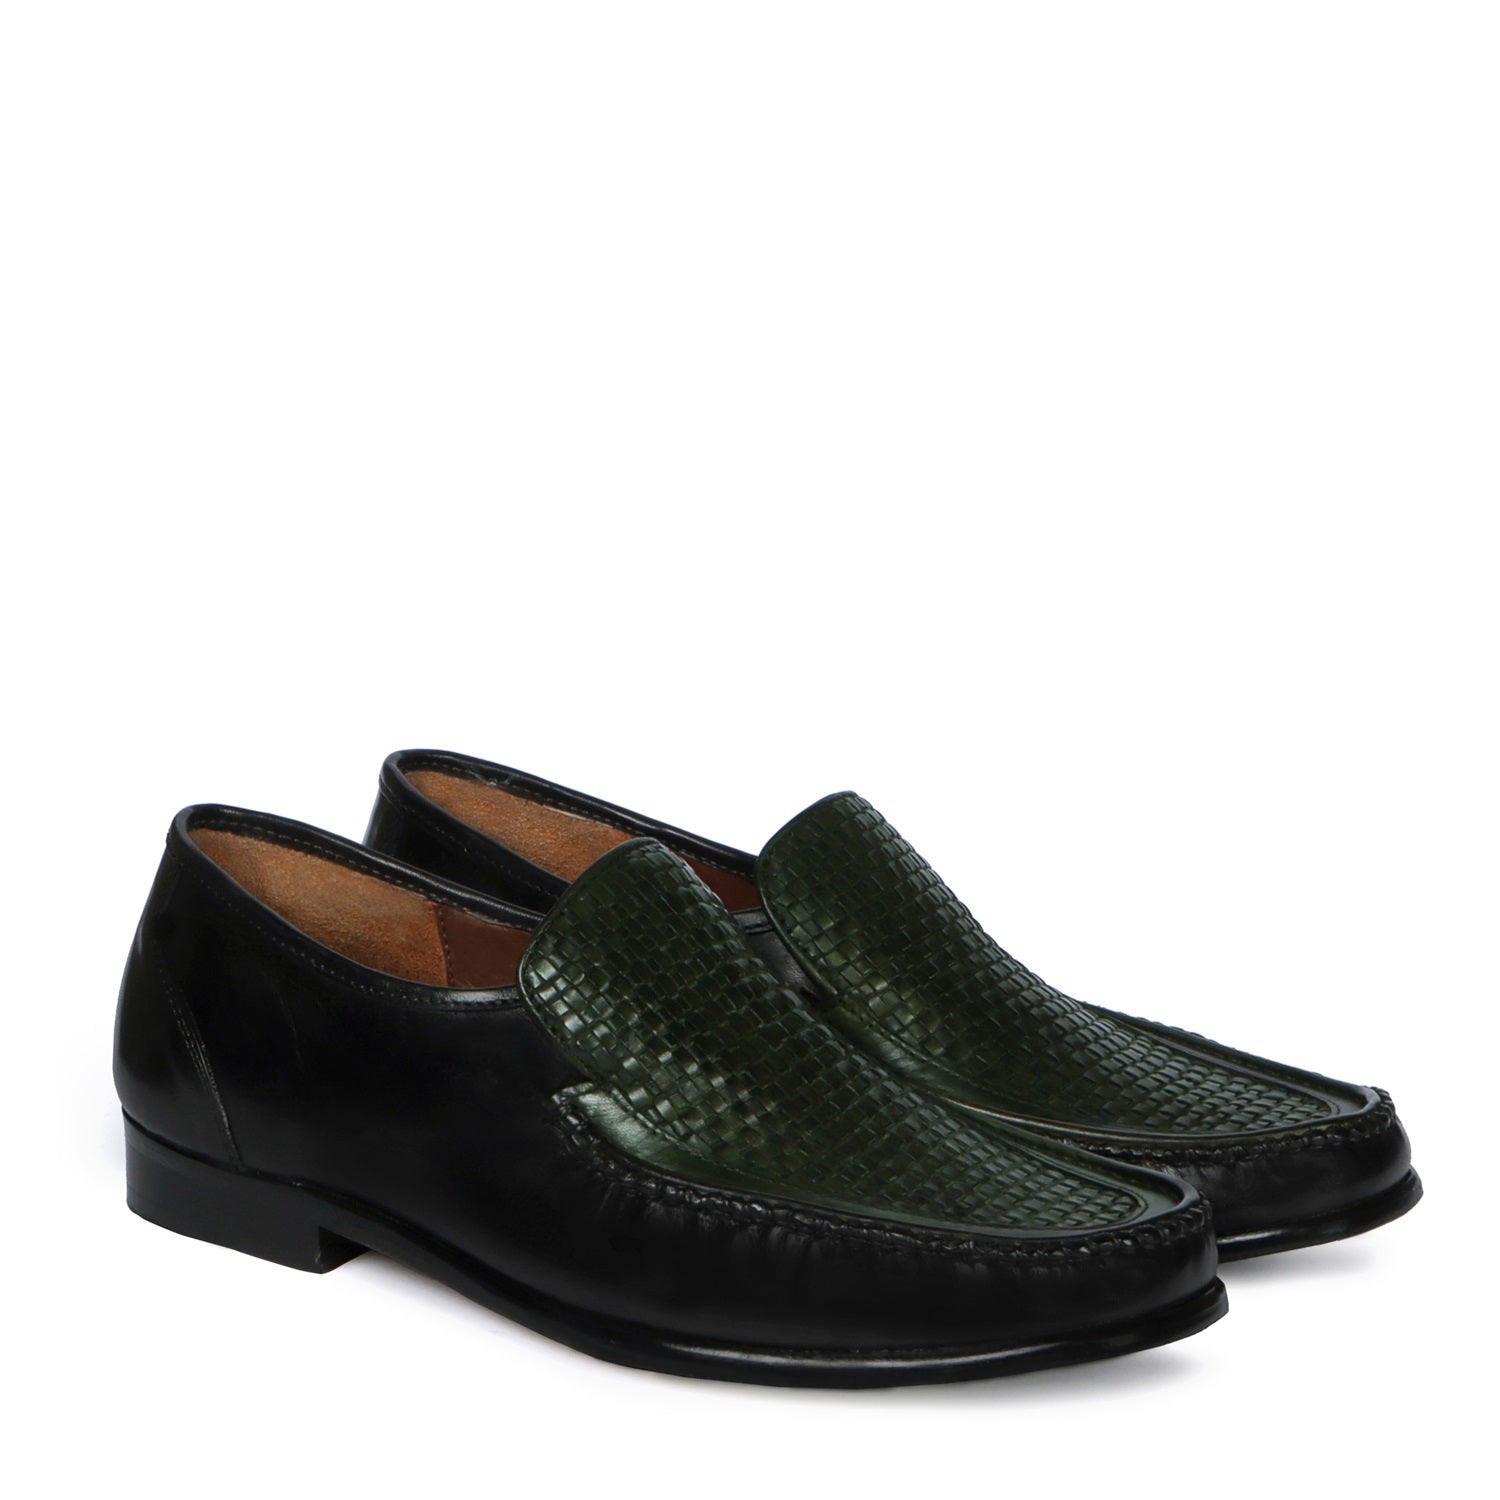 Dark Green Weaved Vamp Black Loafers in Genuine Leather with Leather Sole